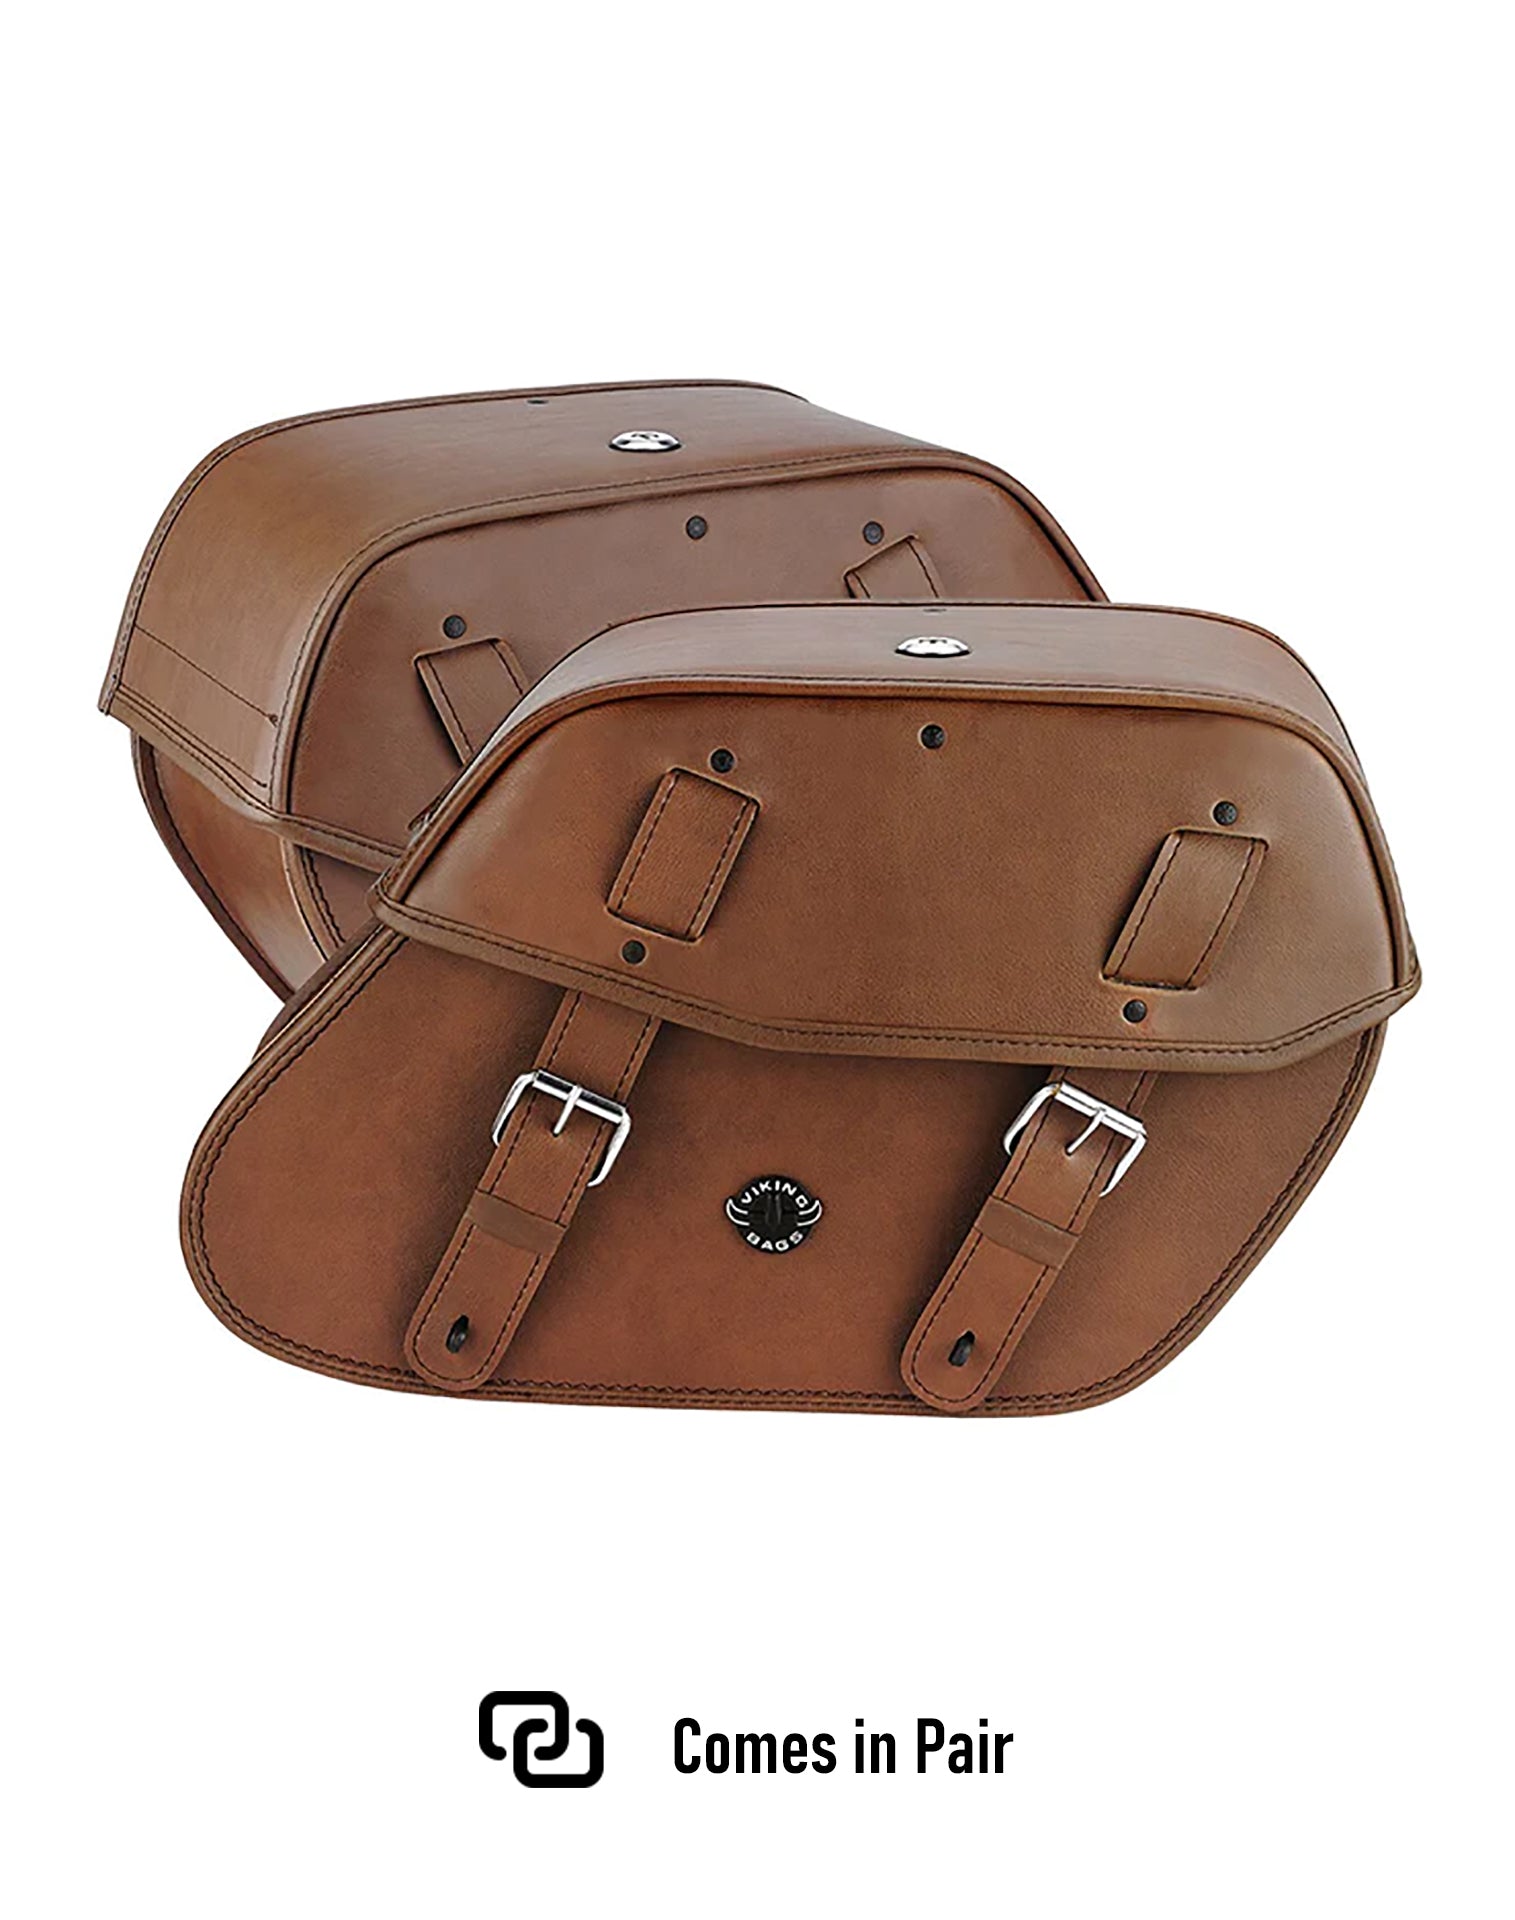 Viking Odin Brown Large Suzuki Boulevard C90 Vl1500 Leather Motorcycle Saddlebags Weather Resistant Bags Comes in Pair